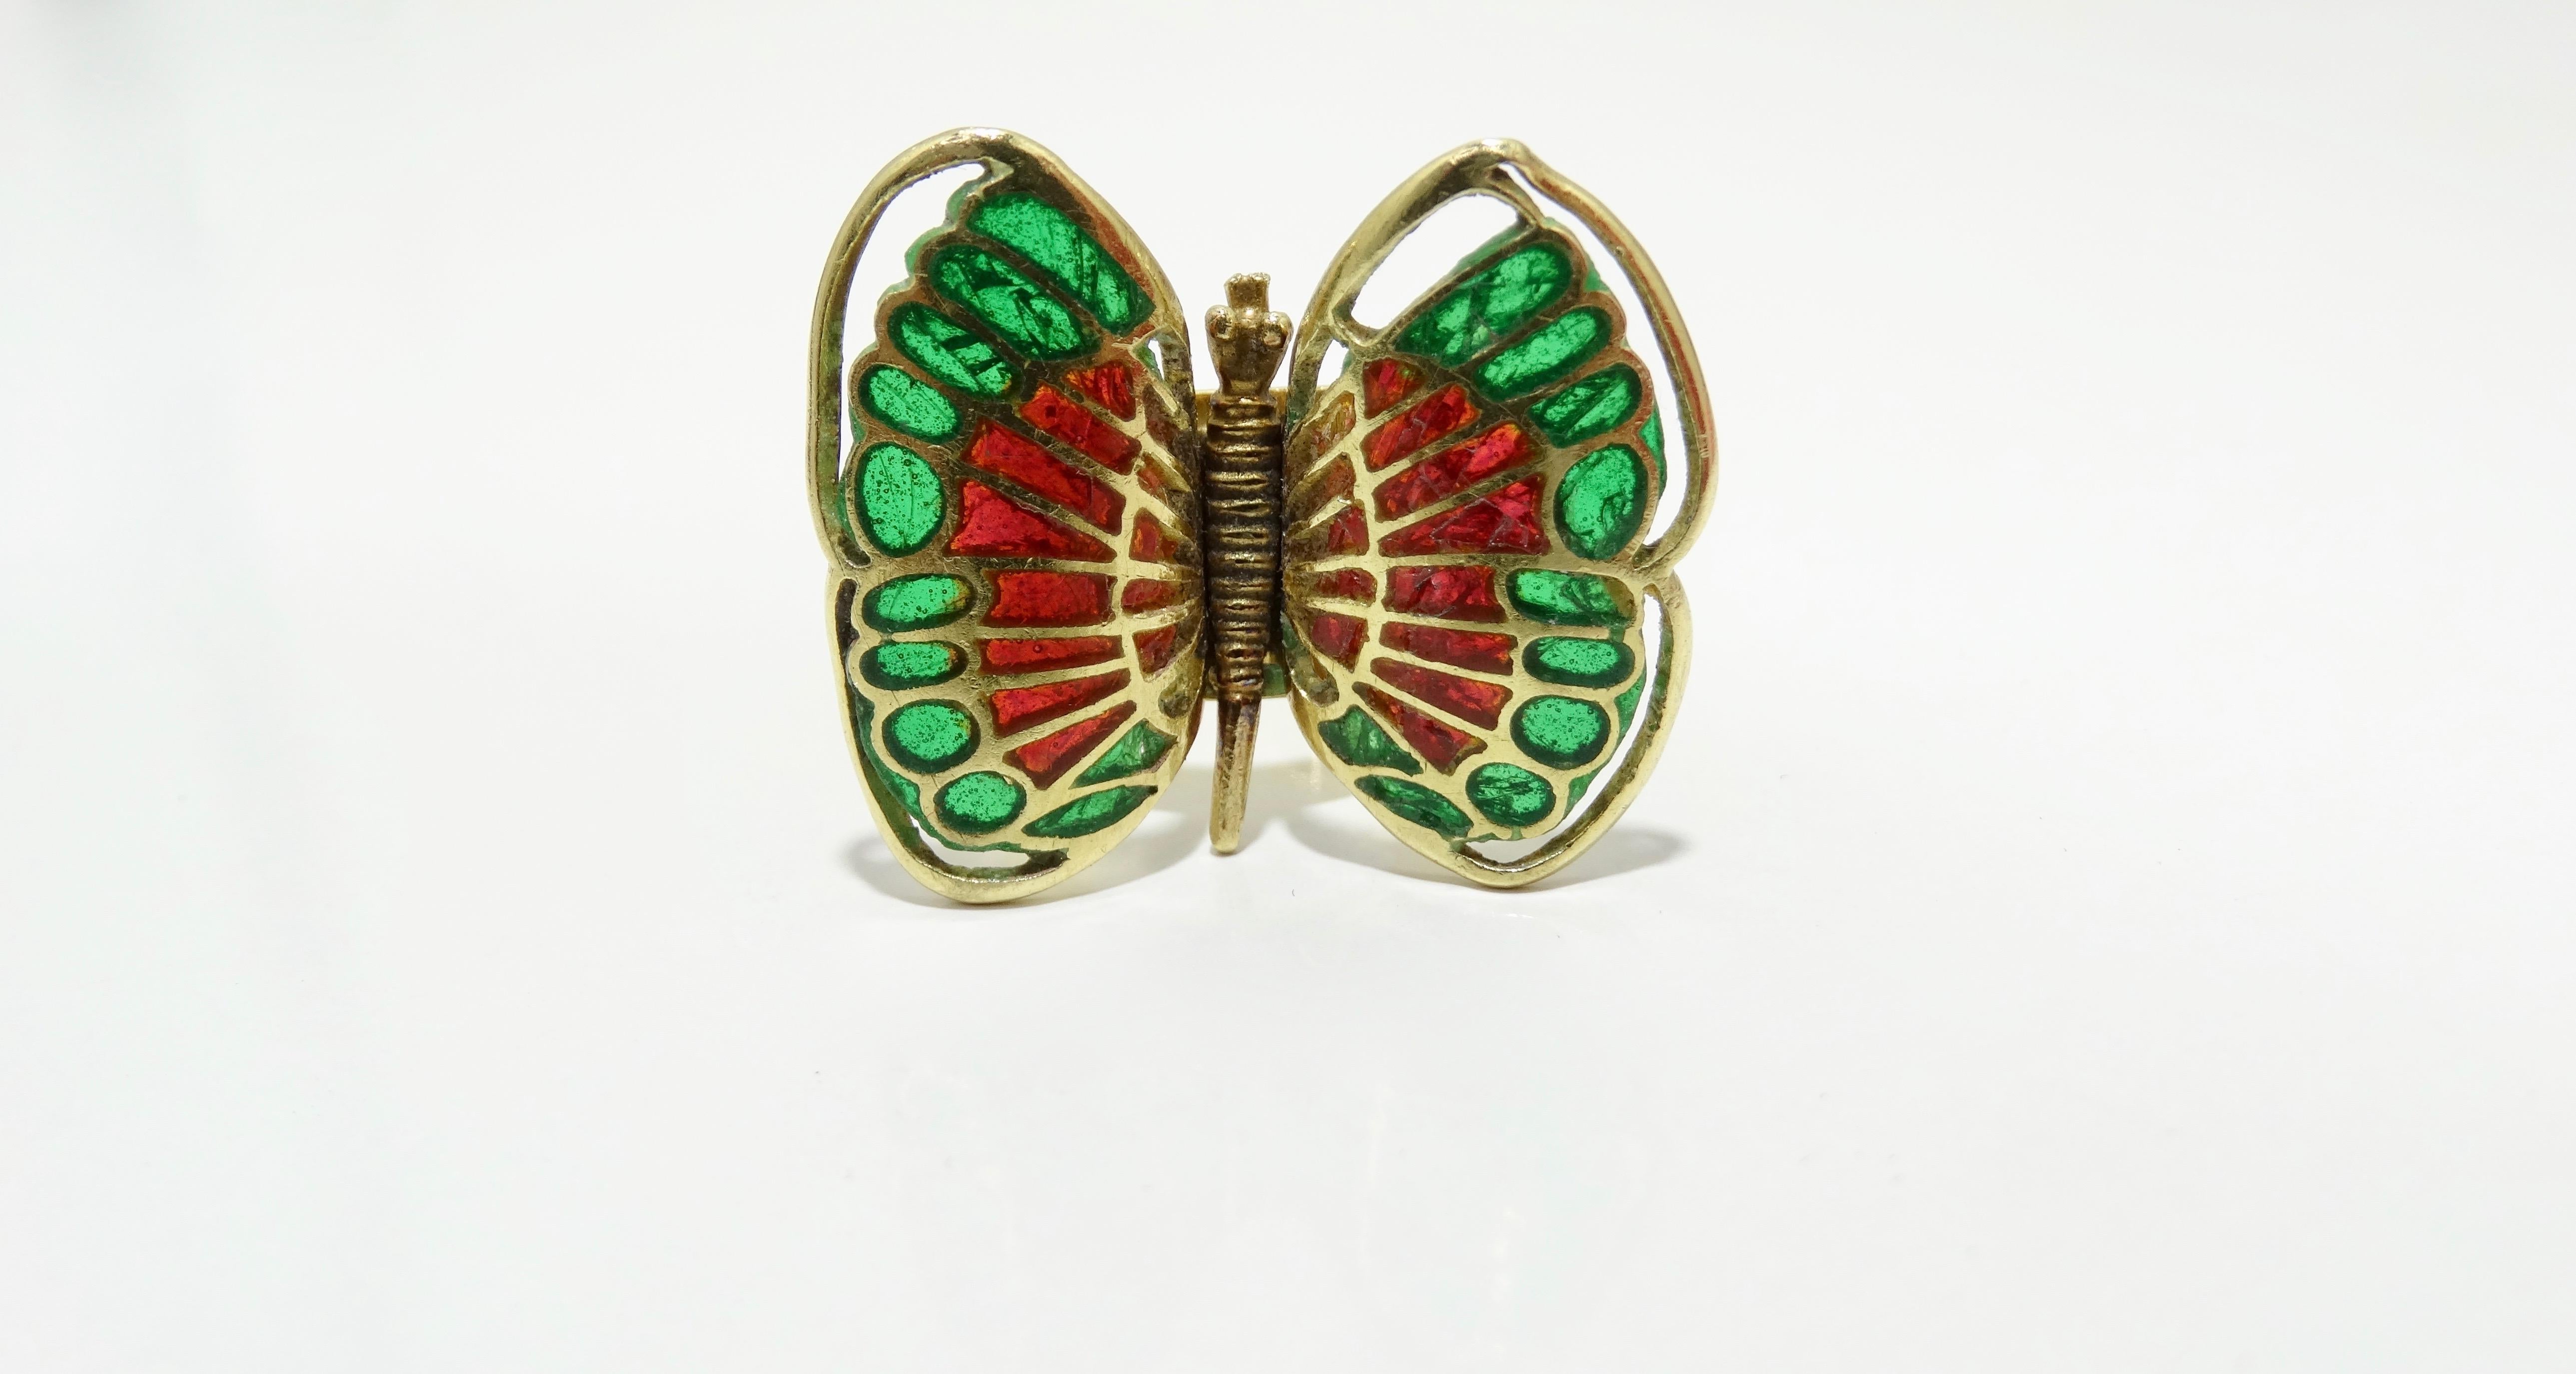 This ring is sure to give you butterflies! This rare custom made antique Gucci ring is crafted from 18k gold and features a red and green glassed filled butterfly. Ring's band is adjustable and is stamped Gucci, Italy, 18k. Total weight is 11.15g. A